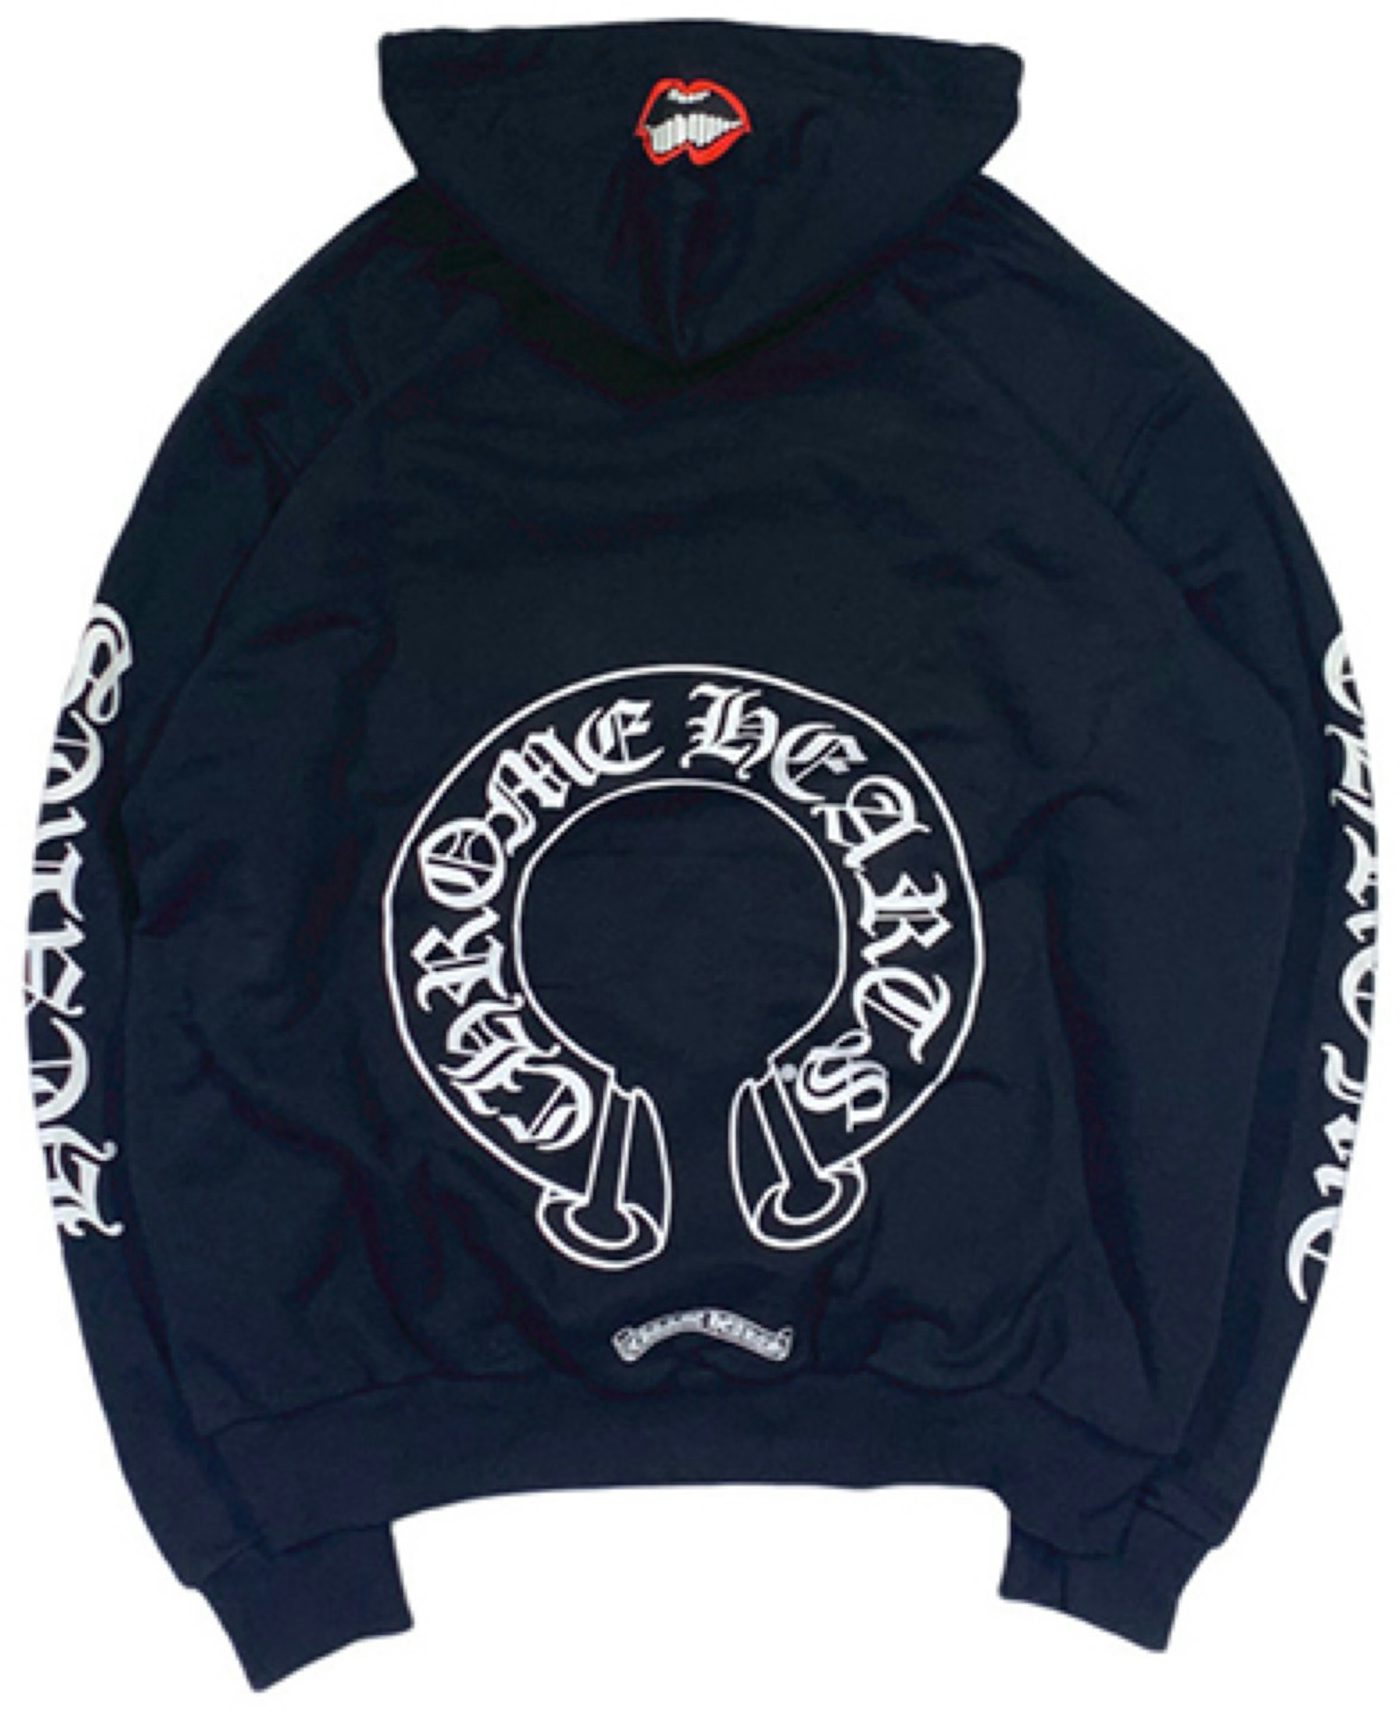 Chrome Hearts Hoodies, Hats, Shirts and More